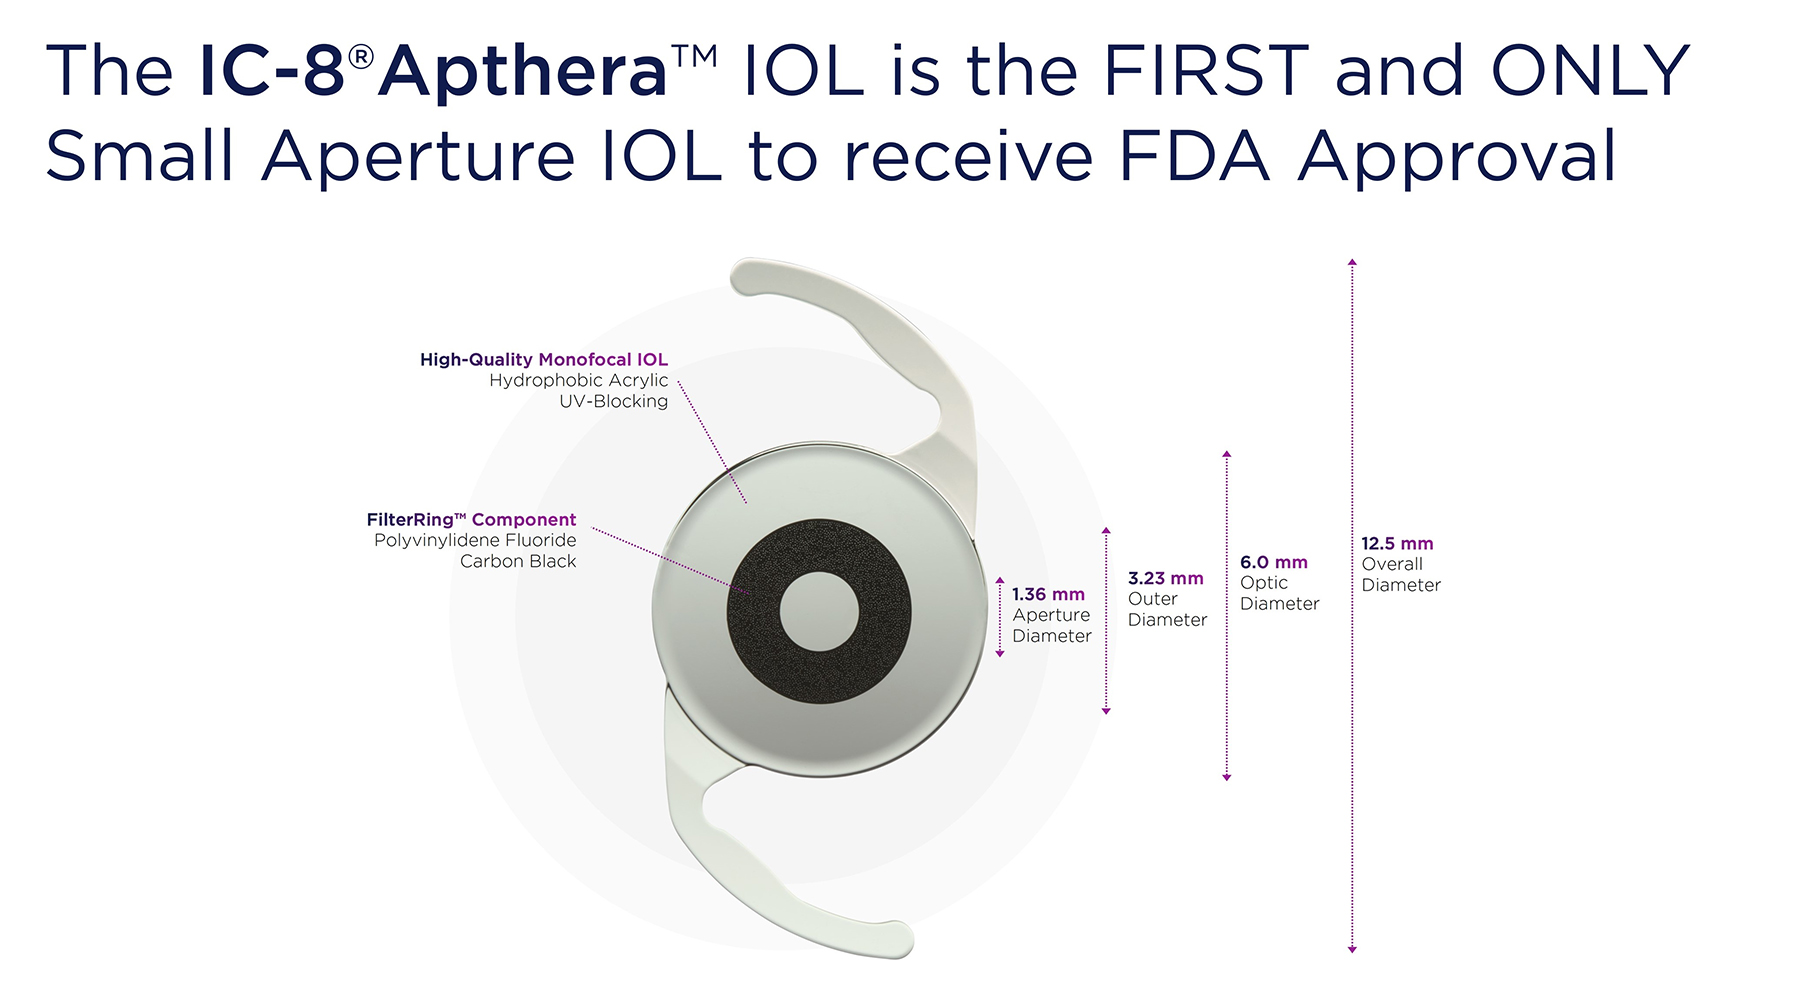 Aphtera® IC-8 small aperture intraocular lens by Bausch & Lomb